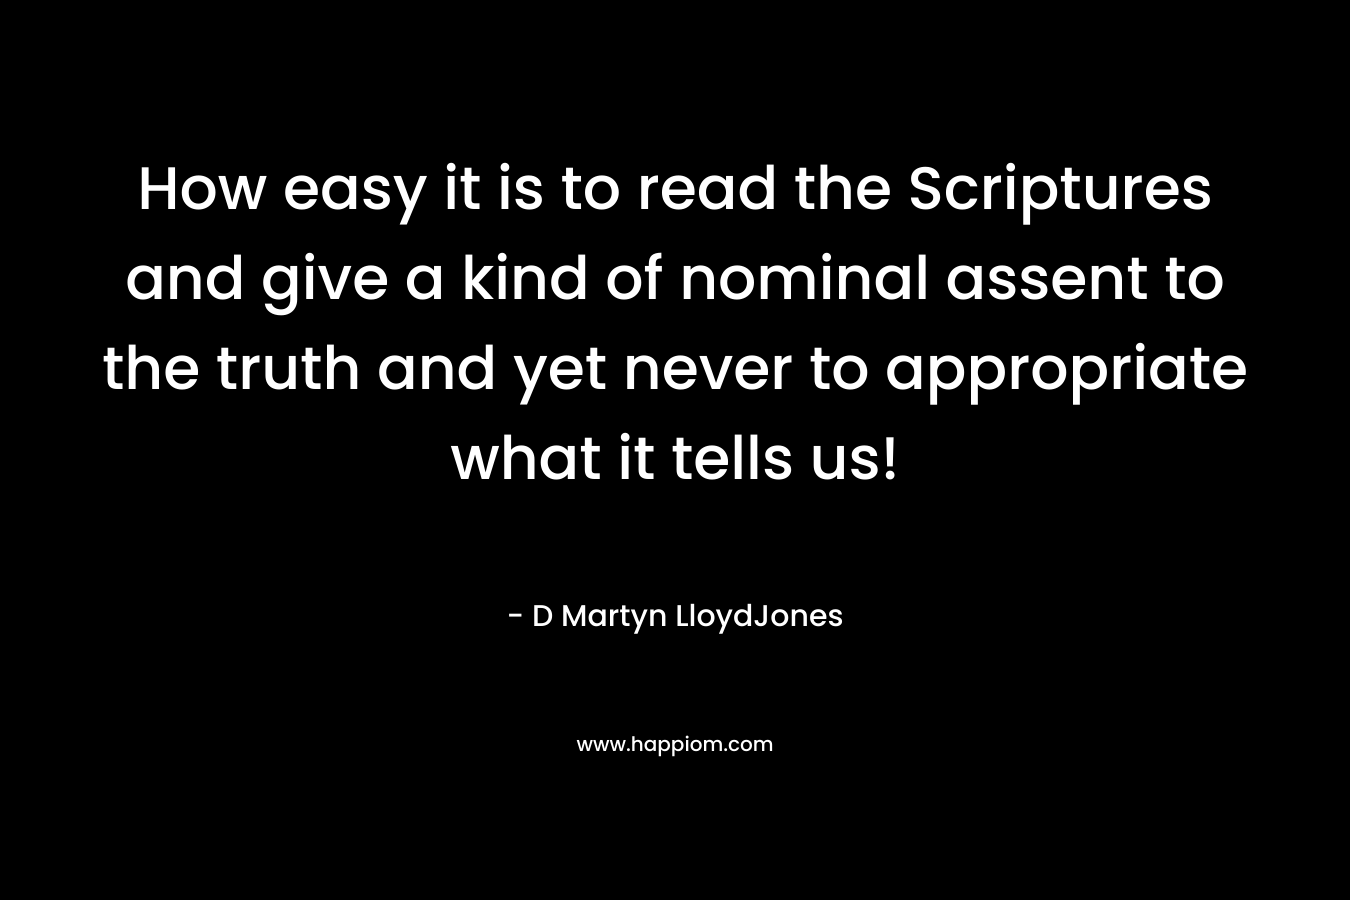 How easy it is to read the Scriptures and give a kind of nominal assent to the truth and yet never to appropriate what it tells us!